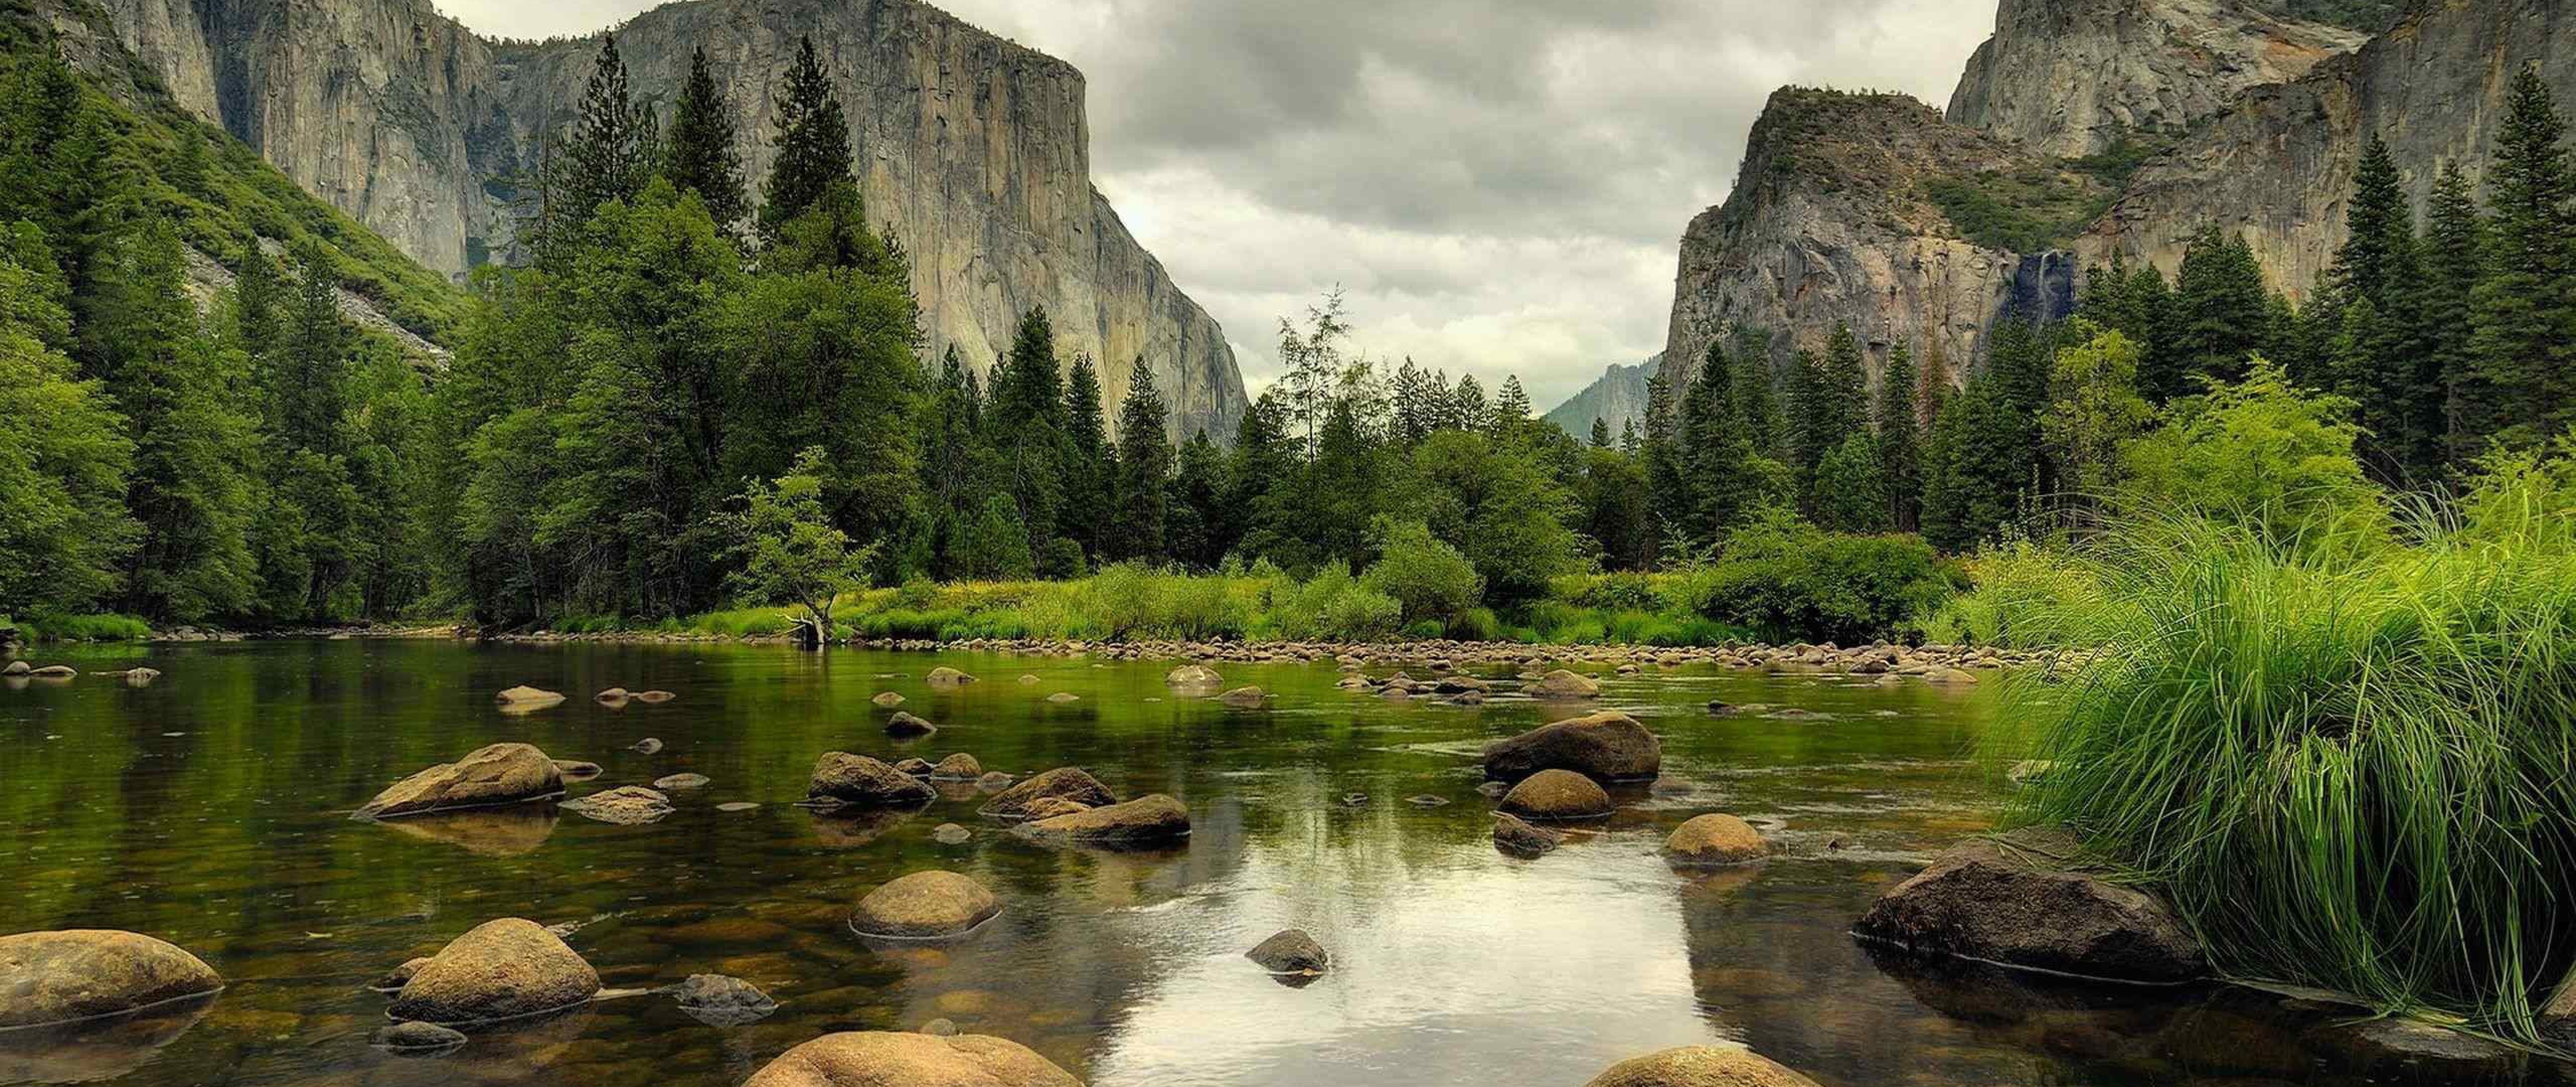 Yosemite Tunnel View Wallpapers, HD Yosemite Tunnel View Backgrounds, Free  Images Download